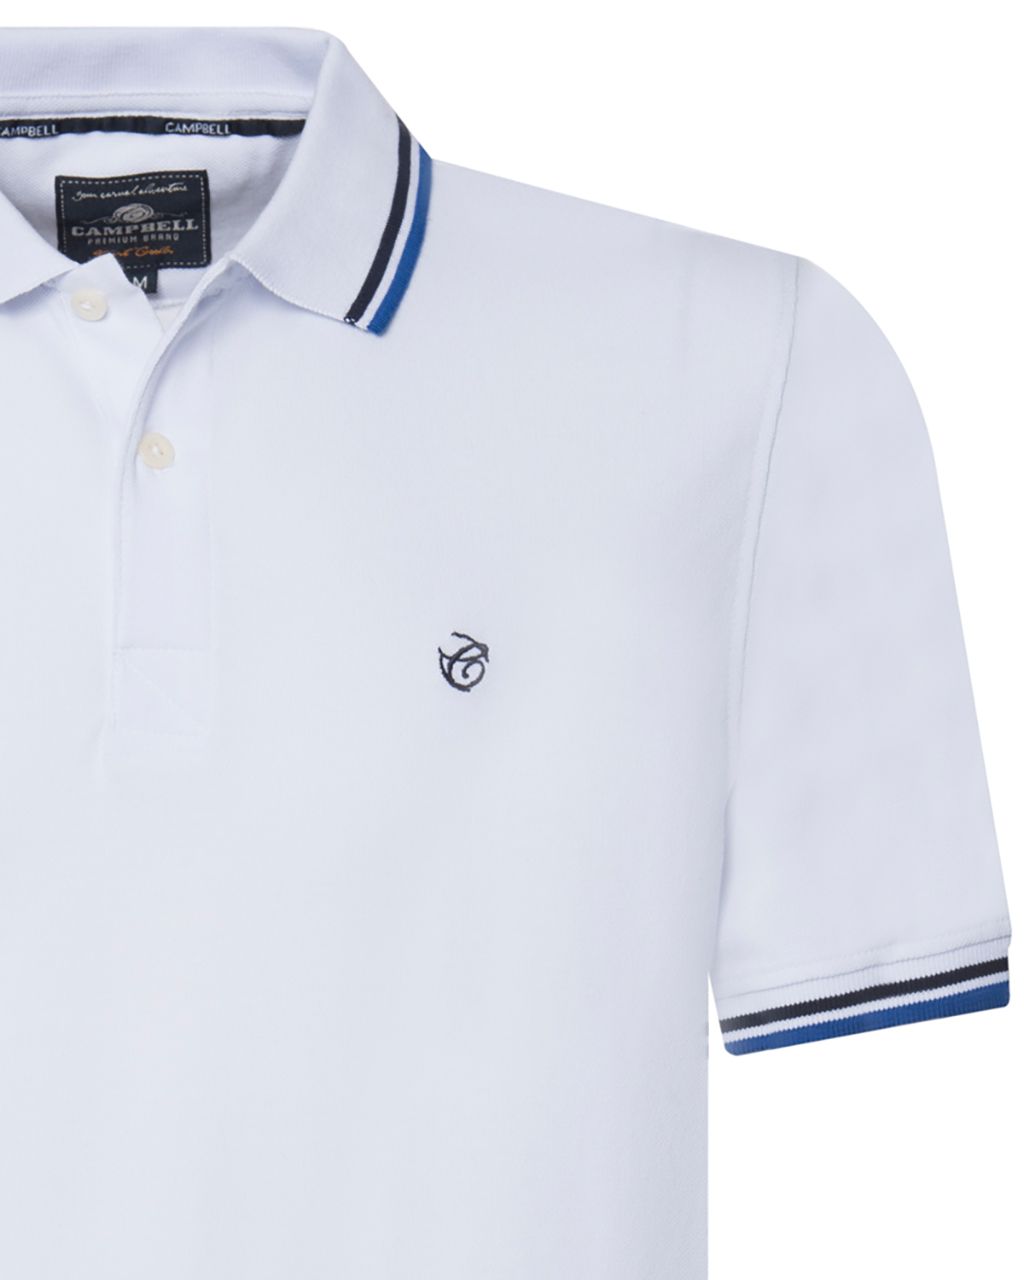 Campbell Classic Leicester Polo KM Briljant White 074096-004-L